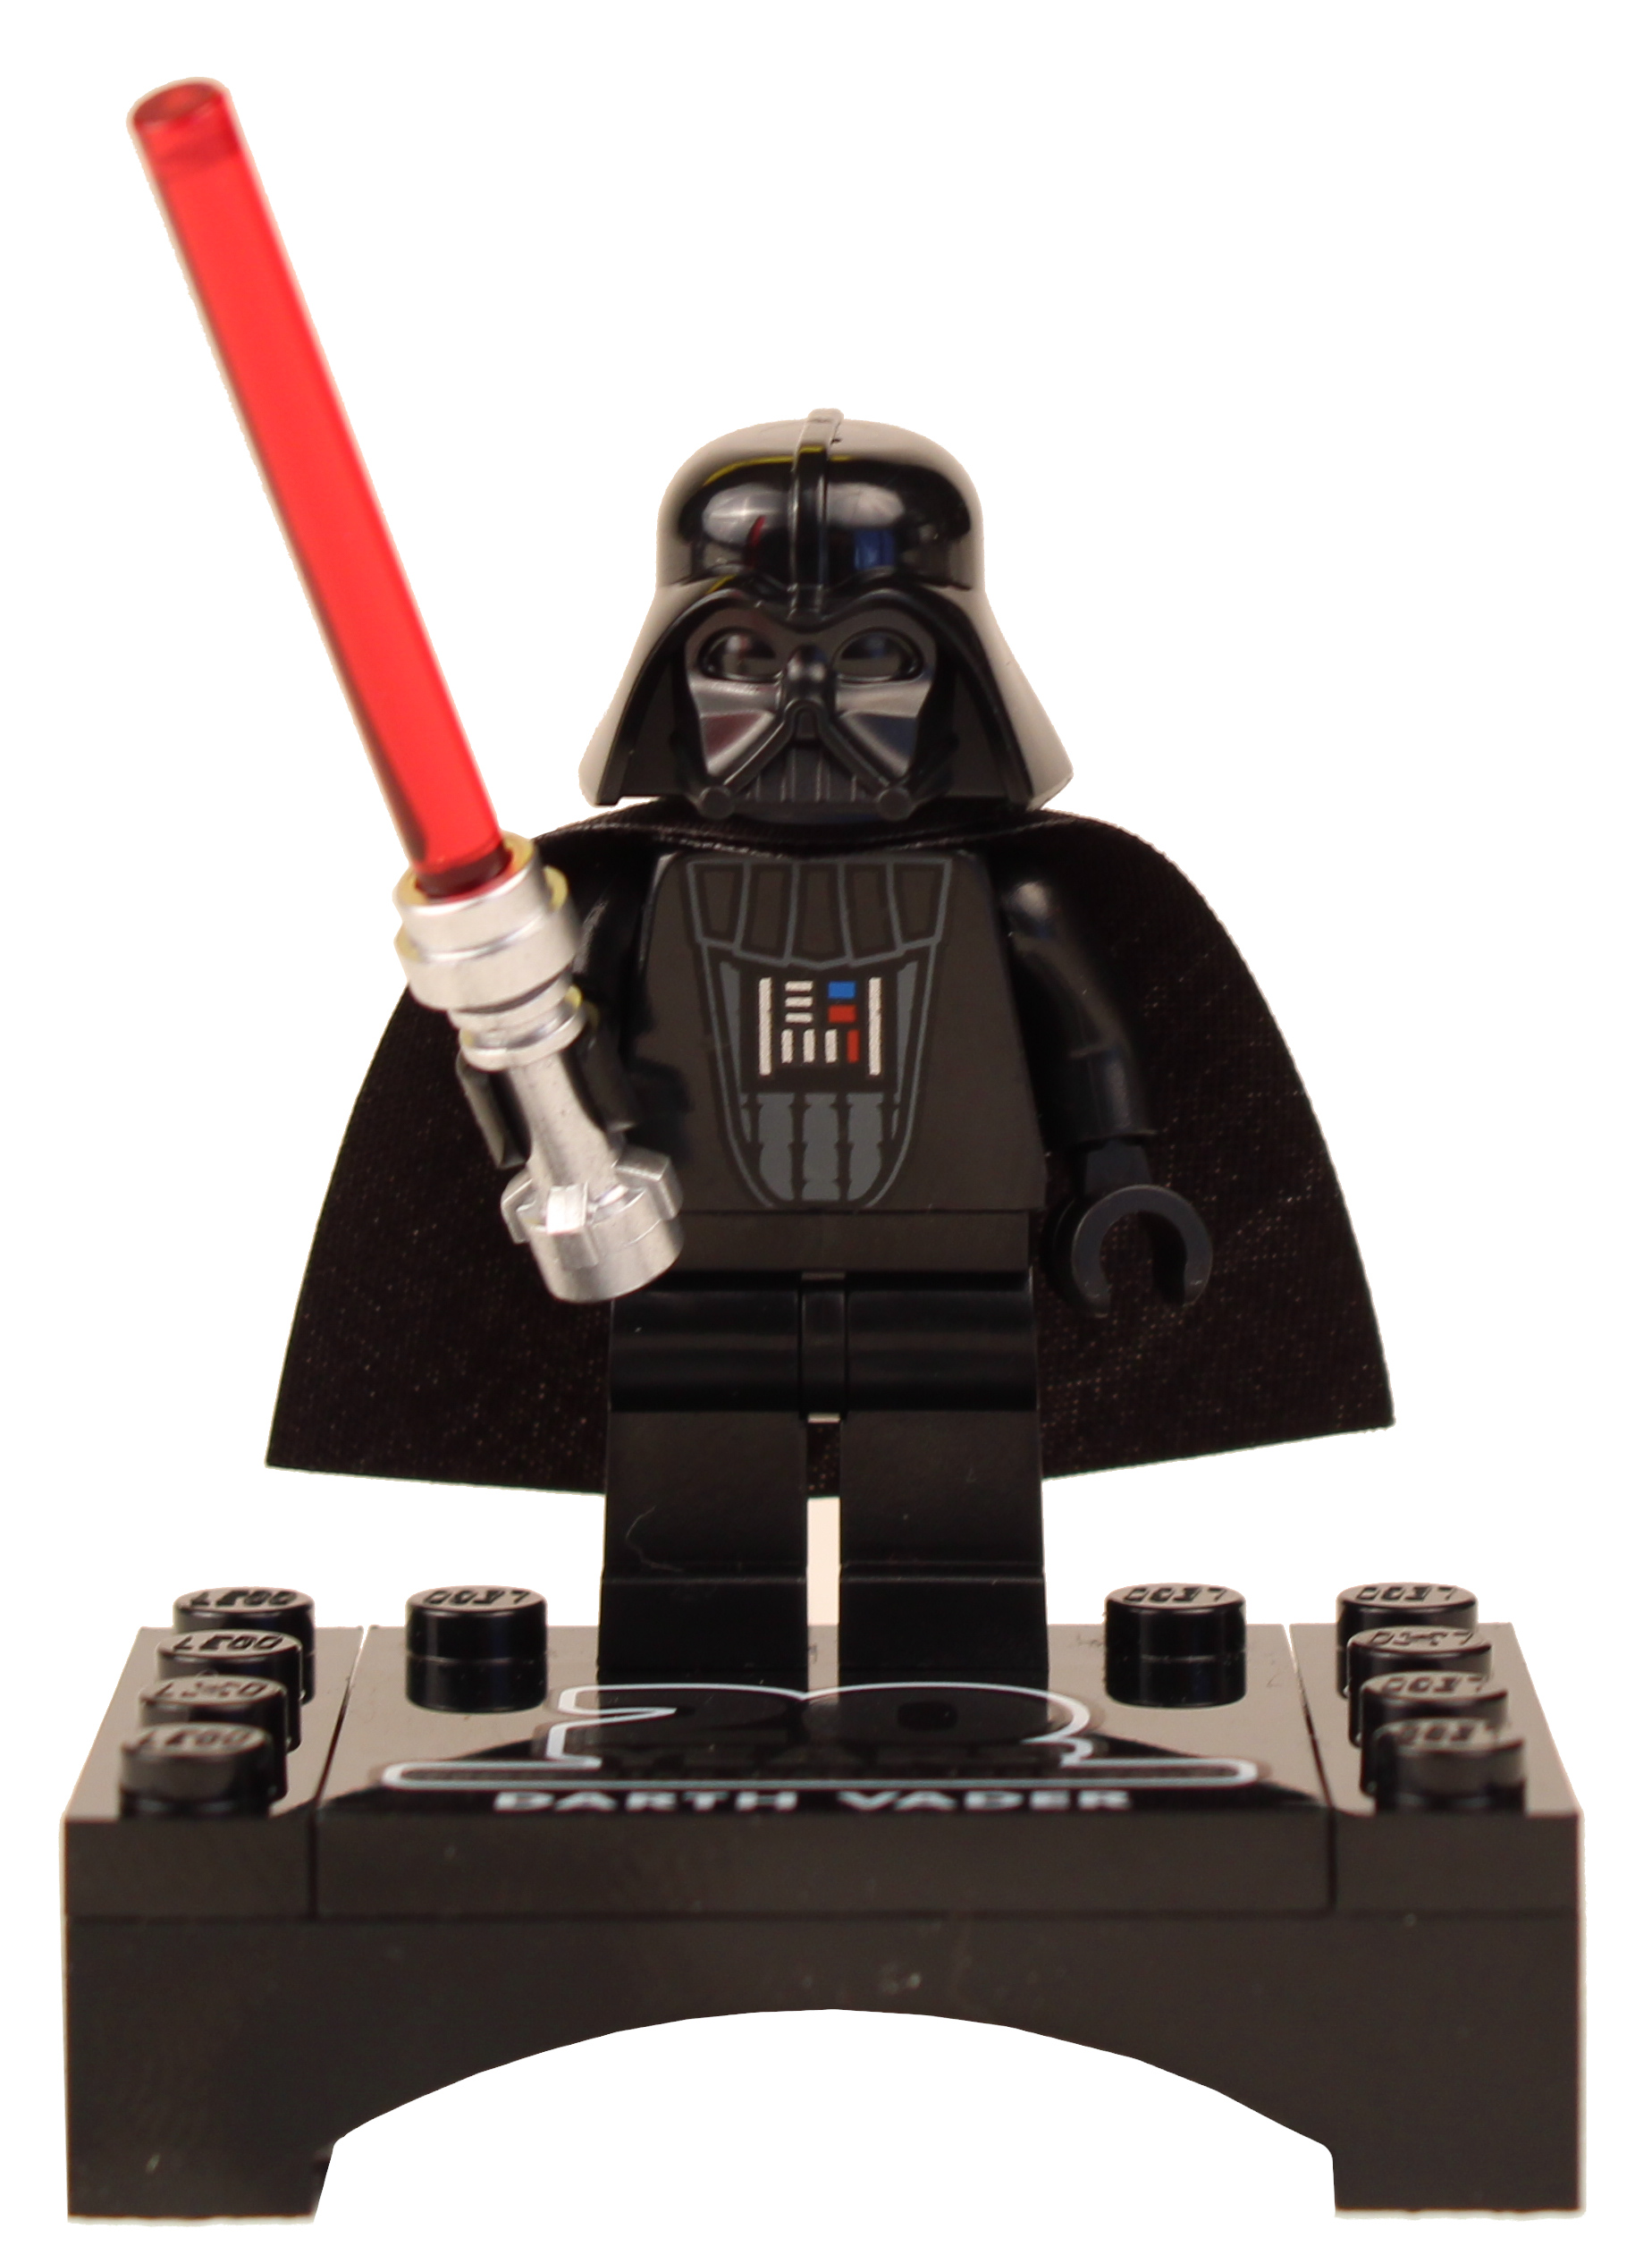 New LEGO STAR WARS 20th Anniversary Darth Vader Minifig w/ Stand 